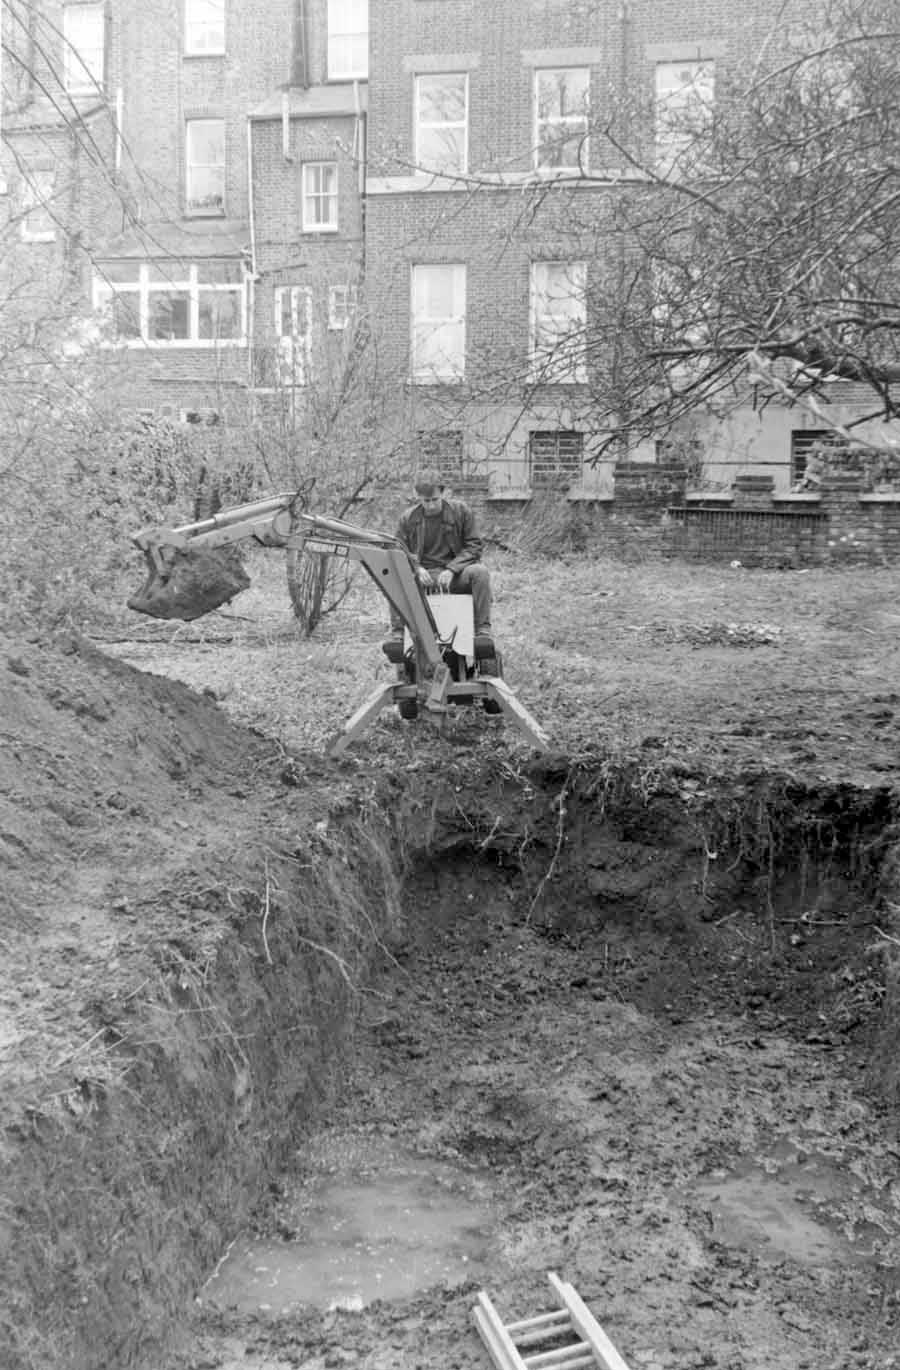 Hedley excavating a trench the size of an Olympic swimming pool at Rectory Grove, Clapham